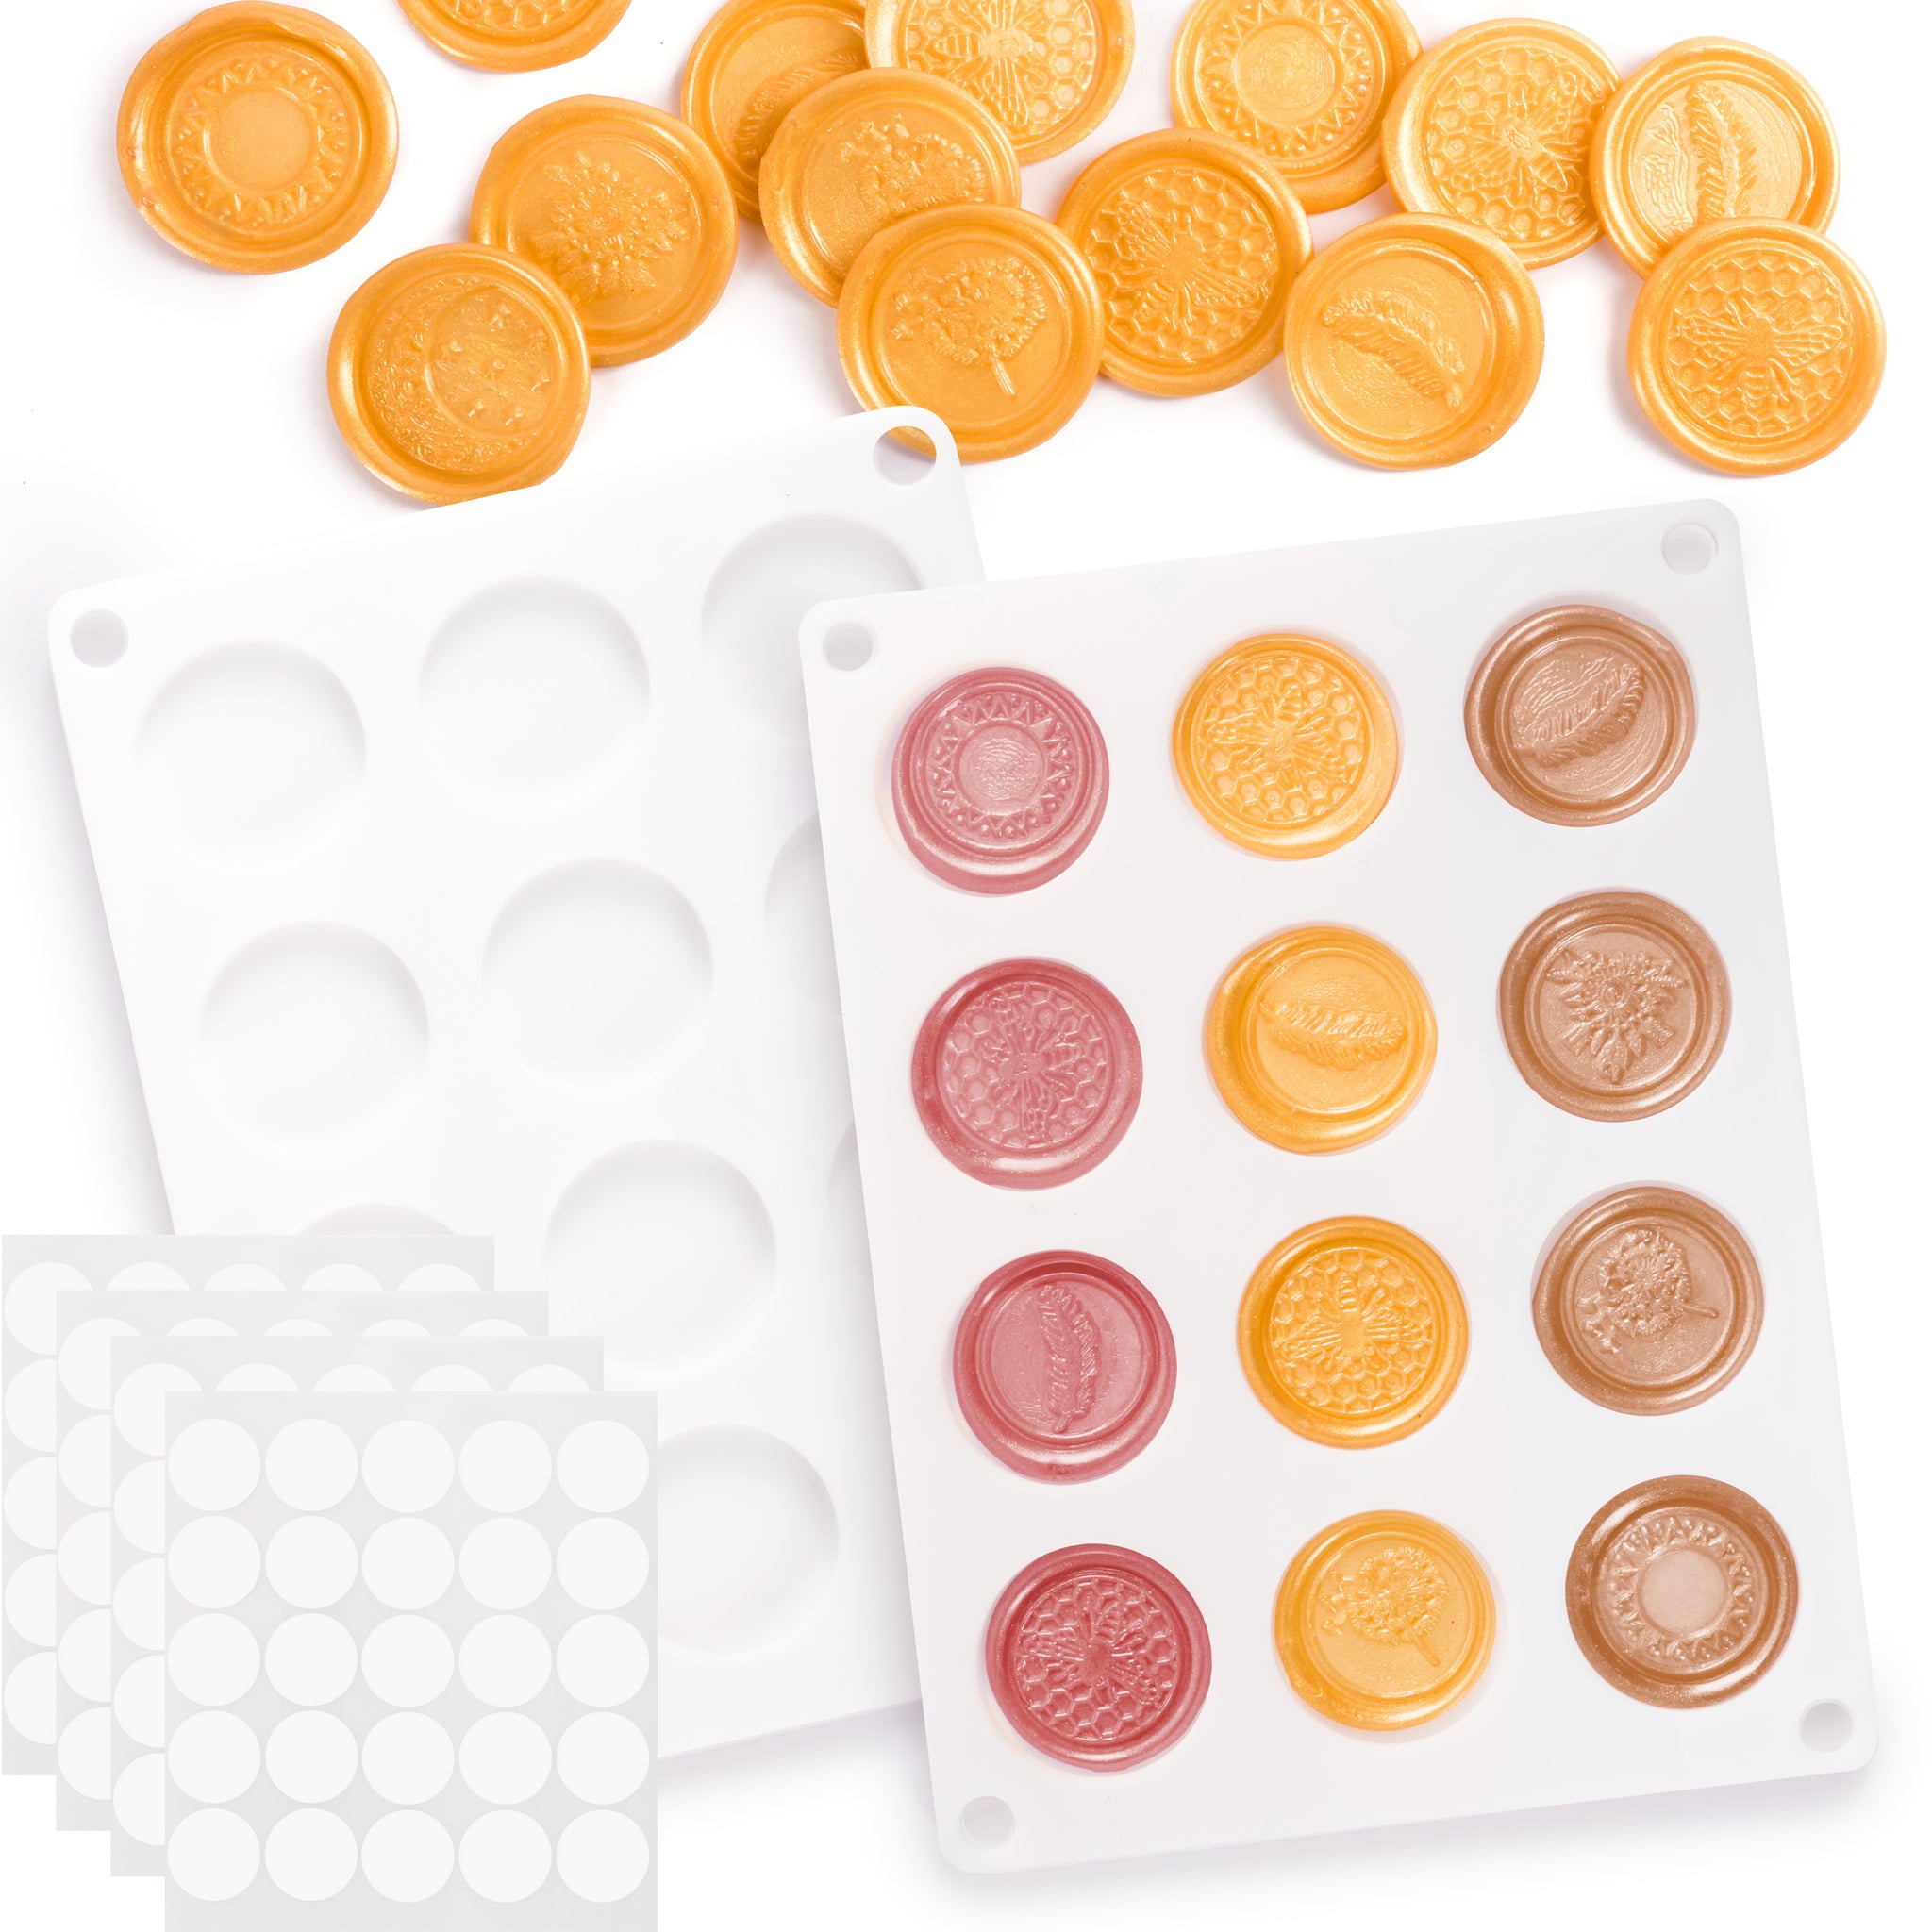 HOPPLER 648 Starter or Refill Wax Seal Kit for Making wax Seals with S